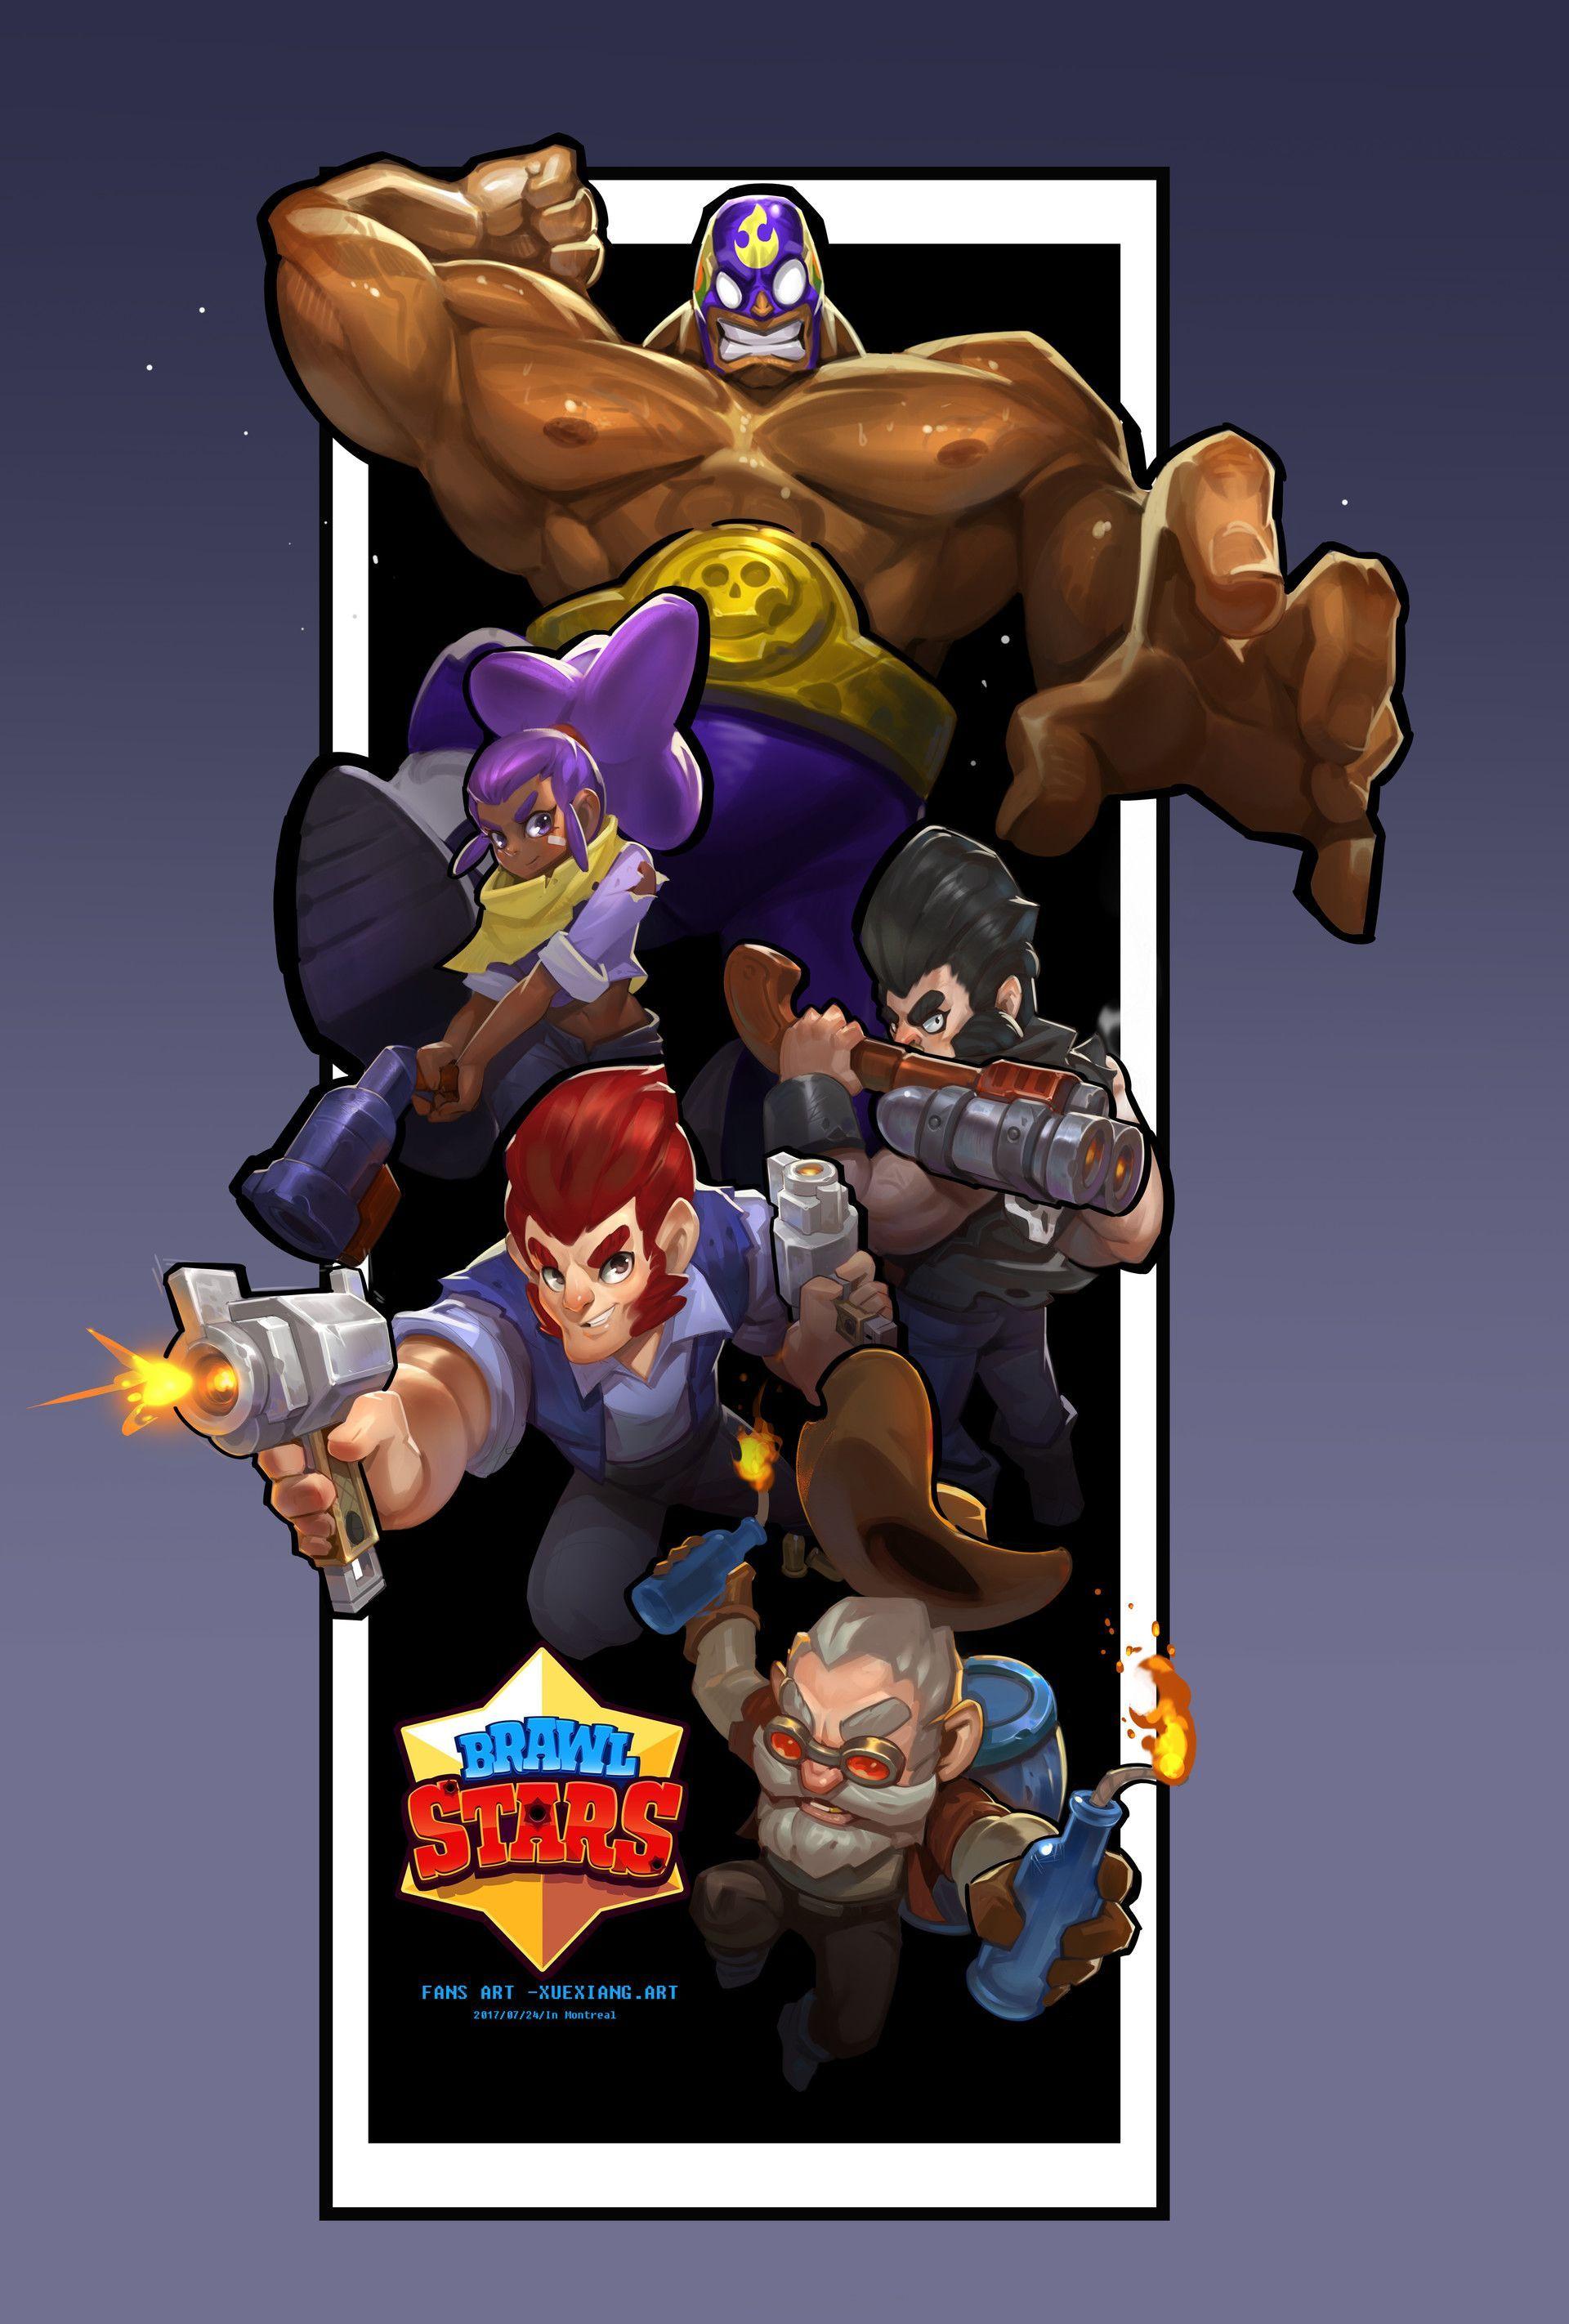 Brawl Stars Wallpapers Wallpaper Cave - brawl stars all brawlers images cover